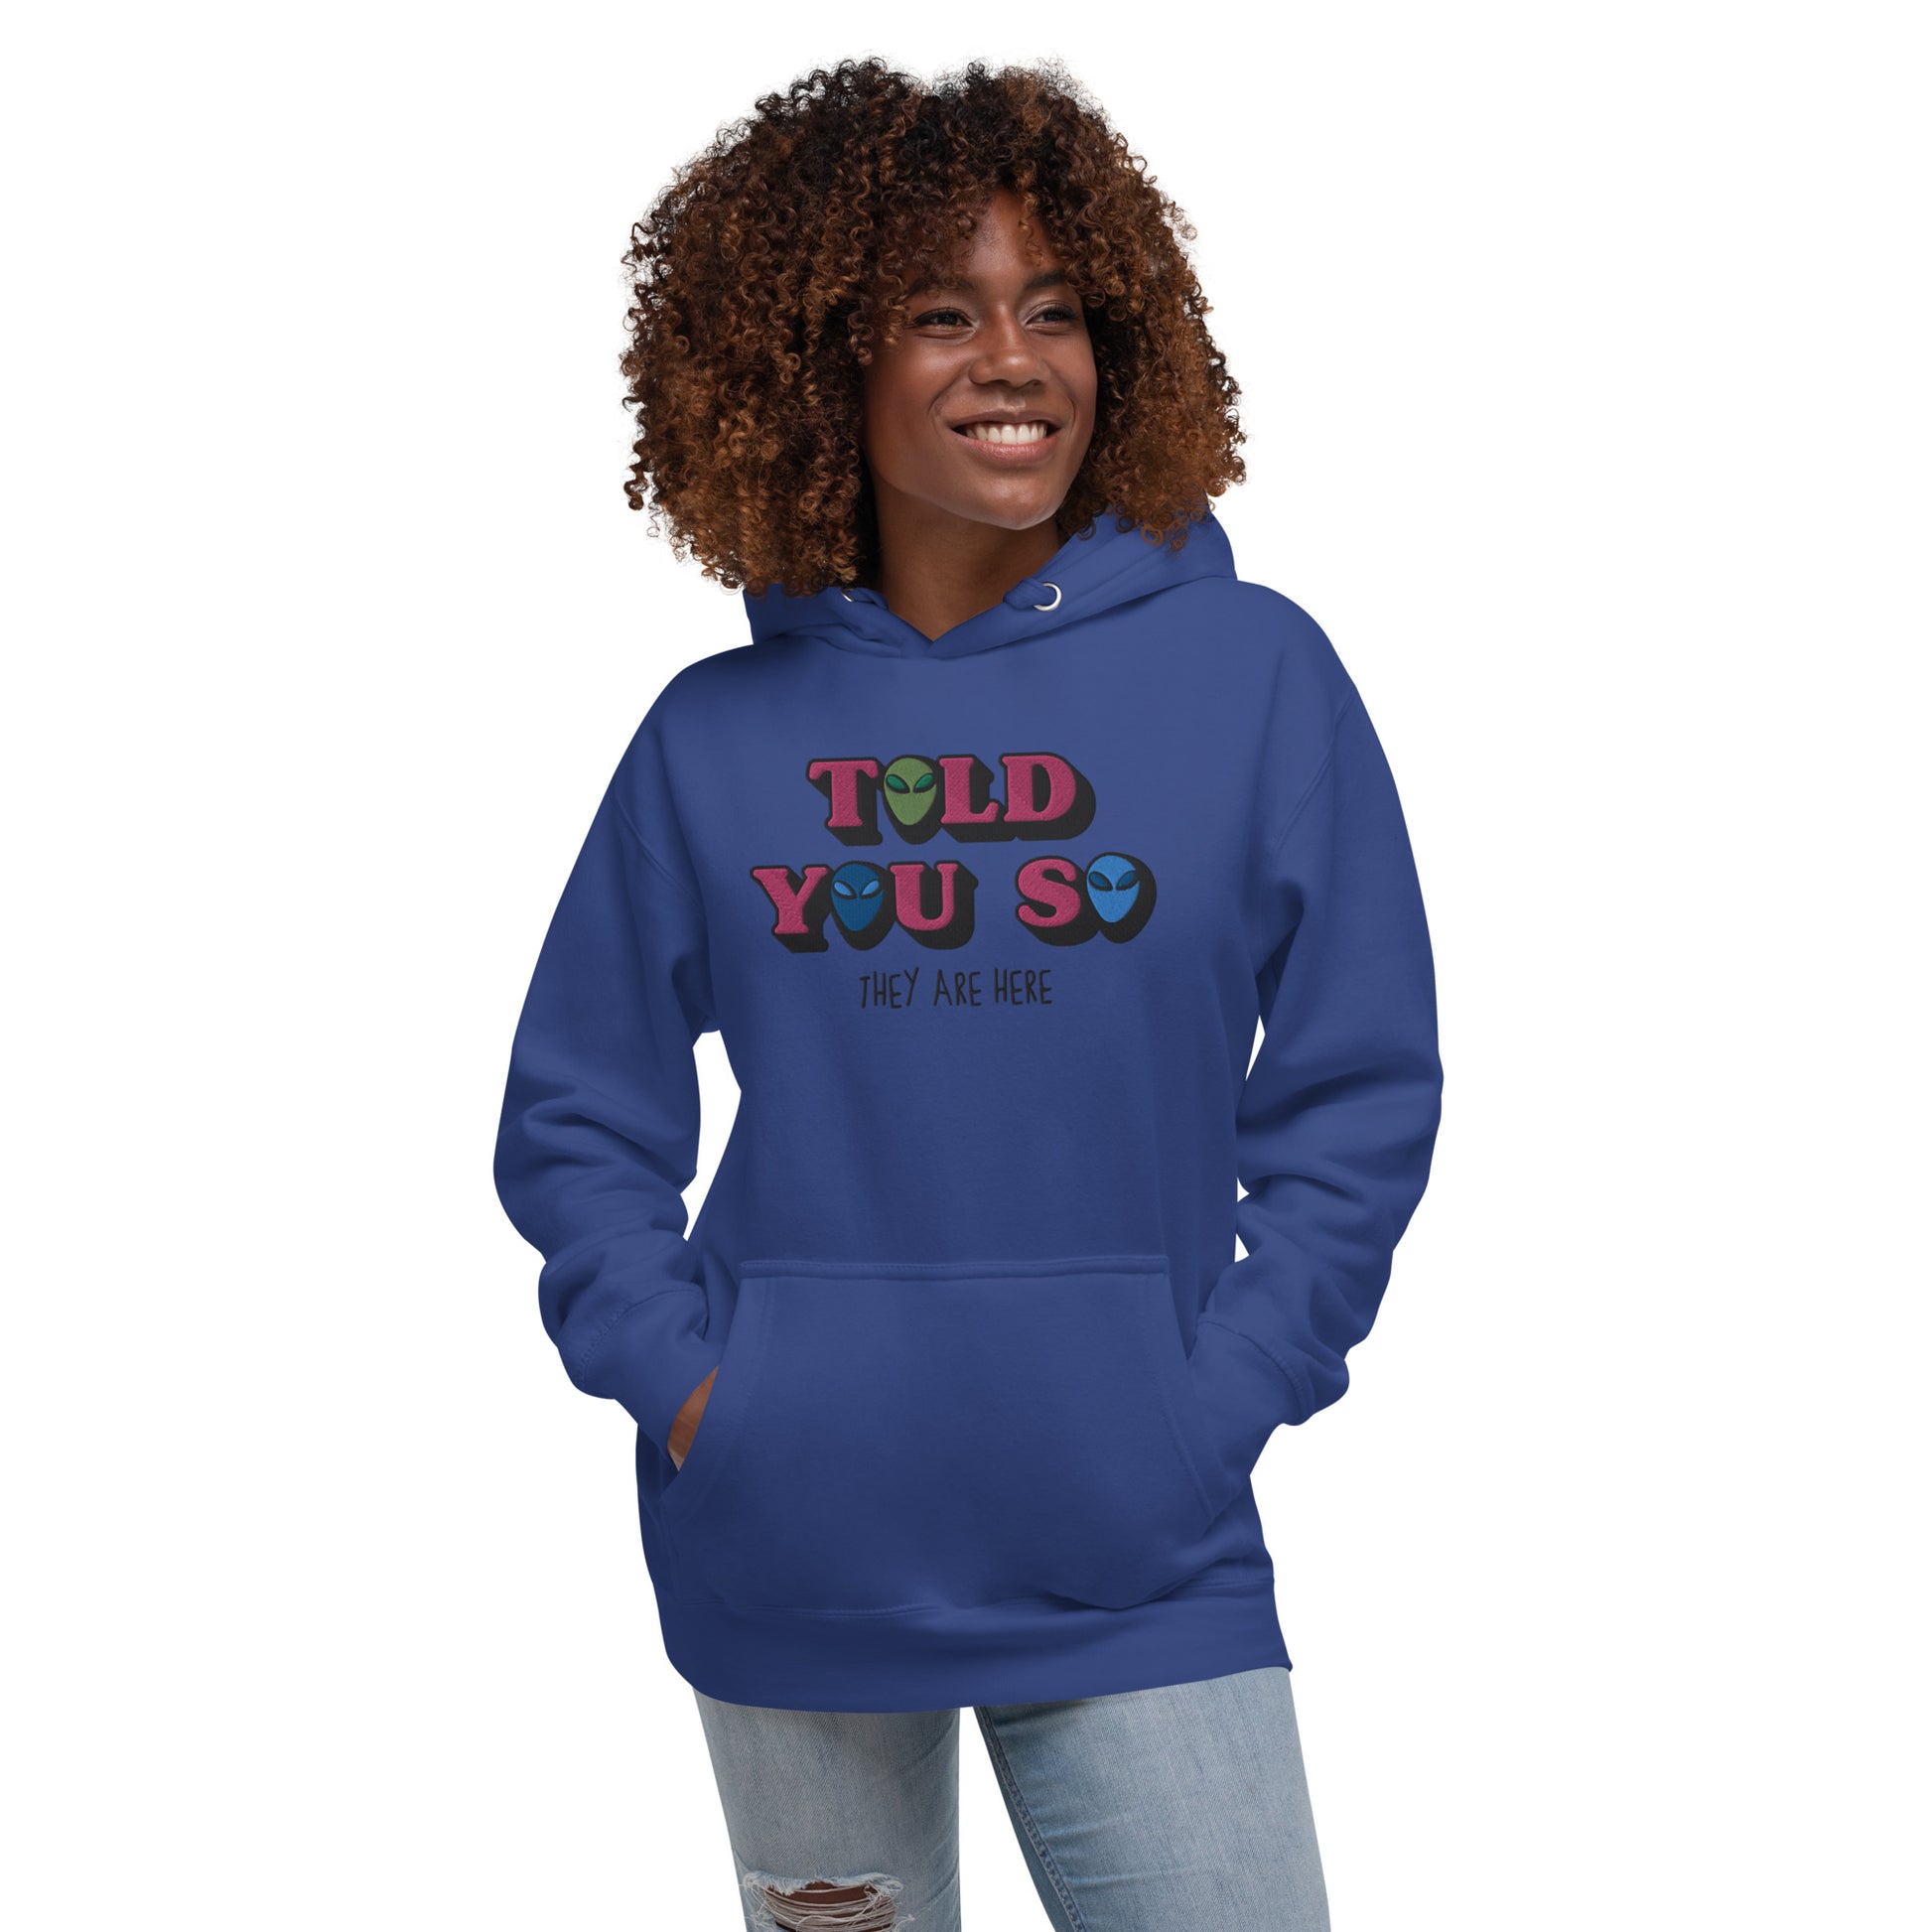 #WEIRDO | This conspiracy theory meme is embroidered at the front of the women’s hoodie: TOLD YOU SO. This is letting the not weird people around you know that you already knew that Aliens were amongst us, before the news came out! So be ready with this hoodie!